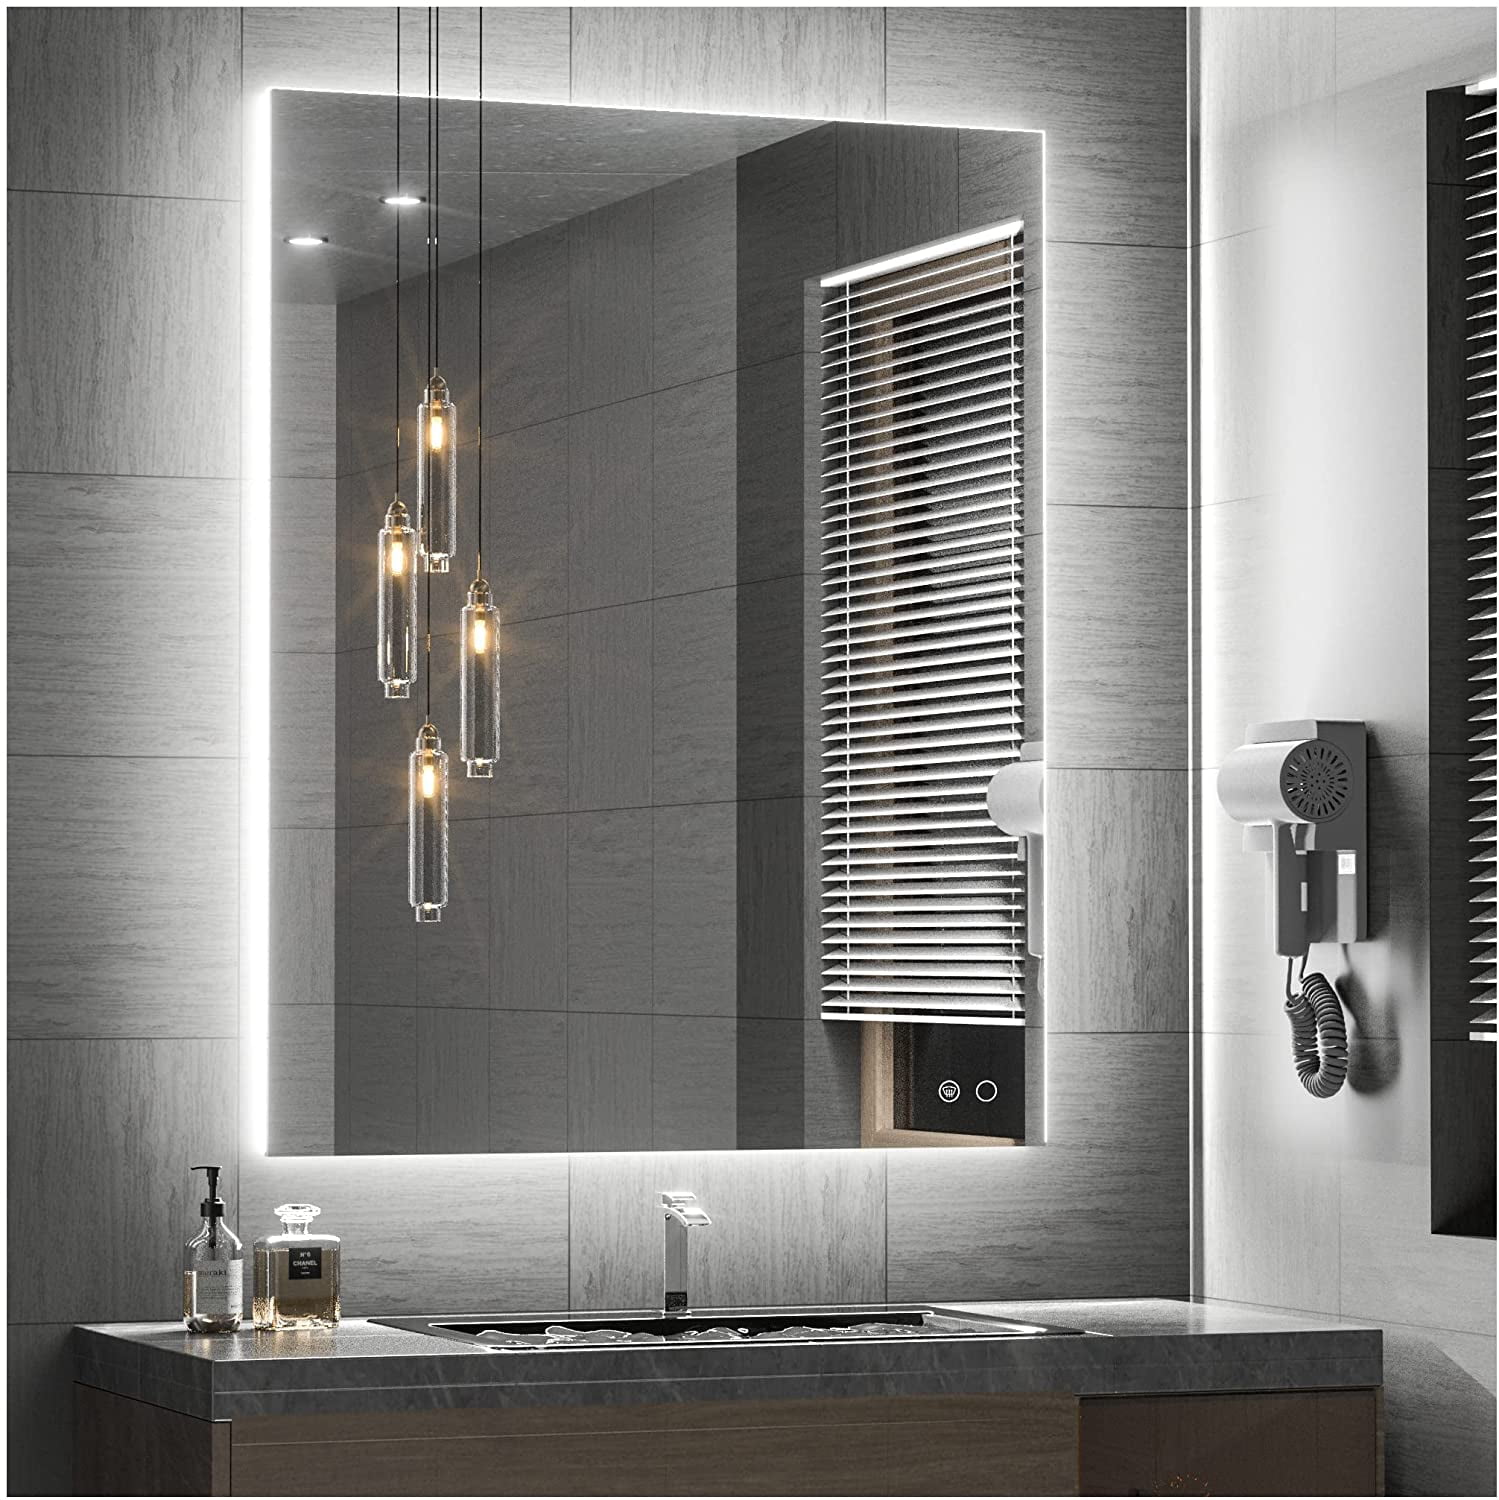 Details about   Bathroom Vanity Light w Socket Cups Dimmable Metal Black Cords 5-Light 36 in. 